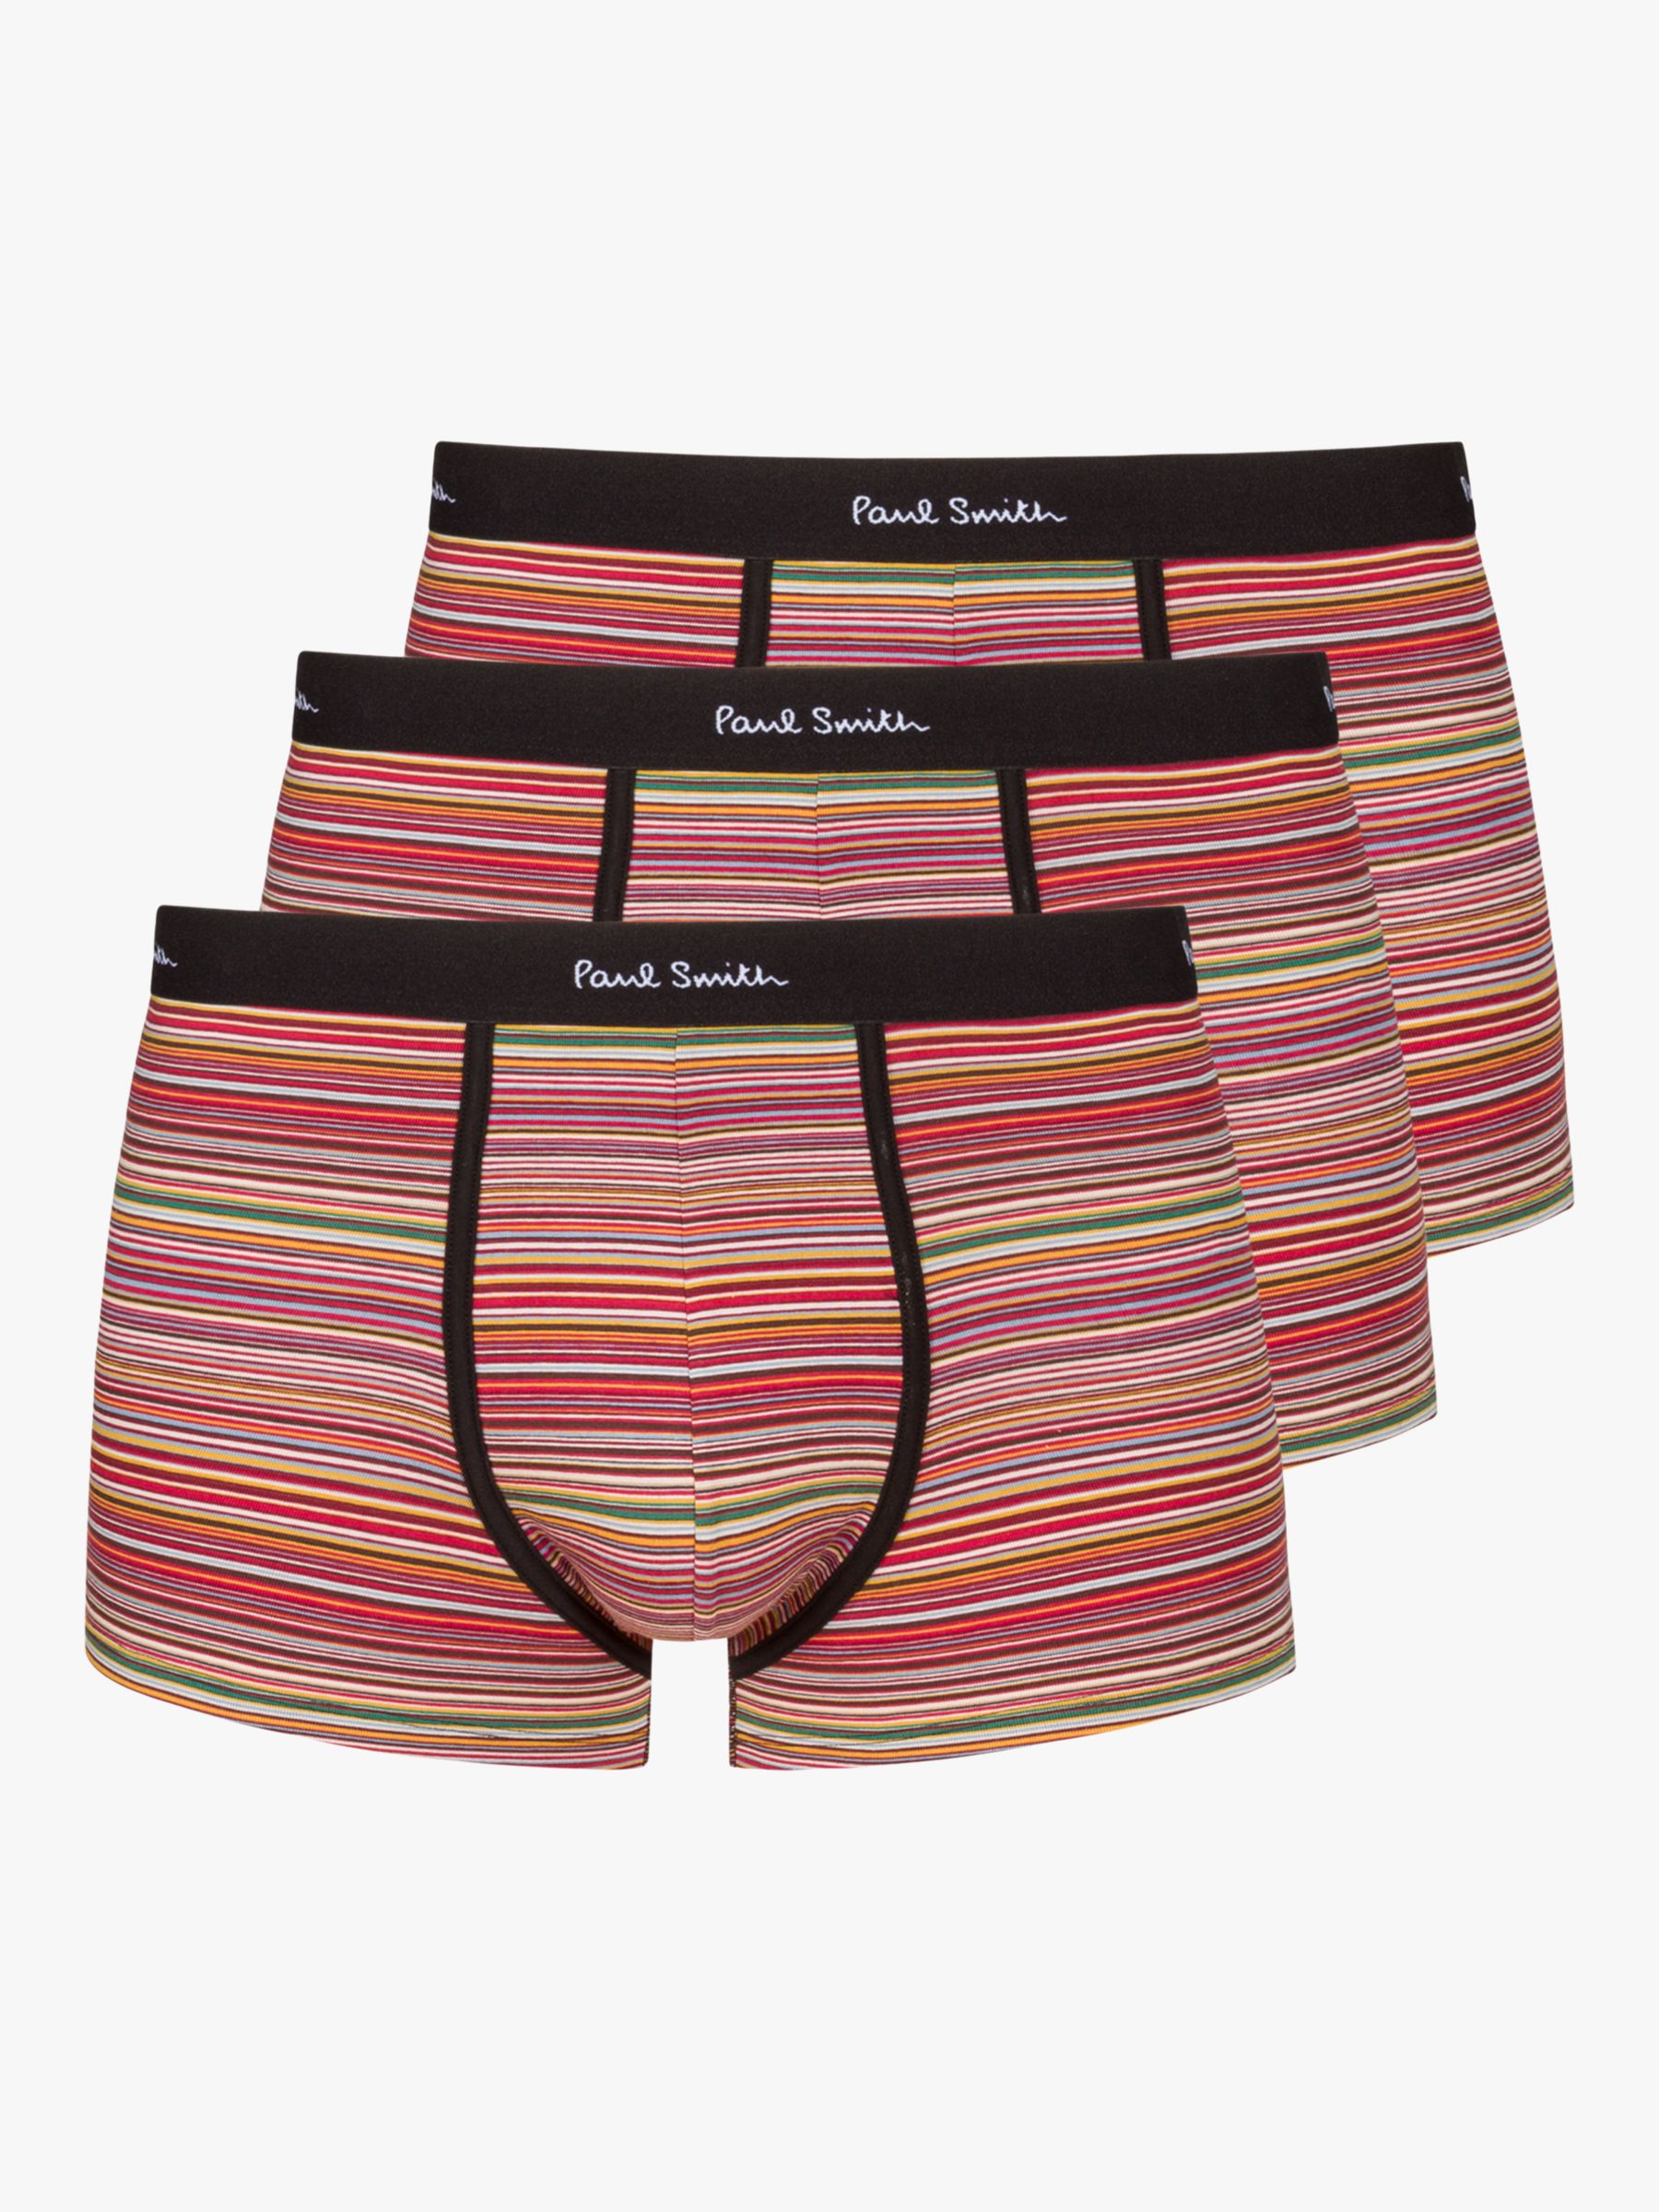 Paul Smith Organic Cotton Stripe Boxers, Pack of 3, Red/Multi, L